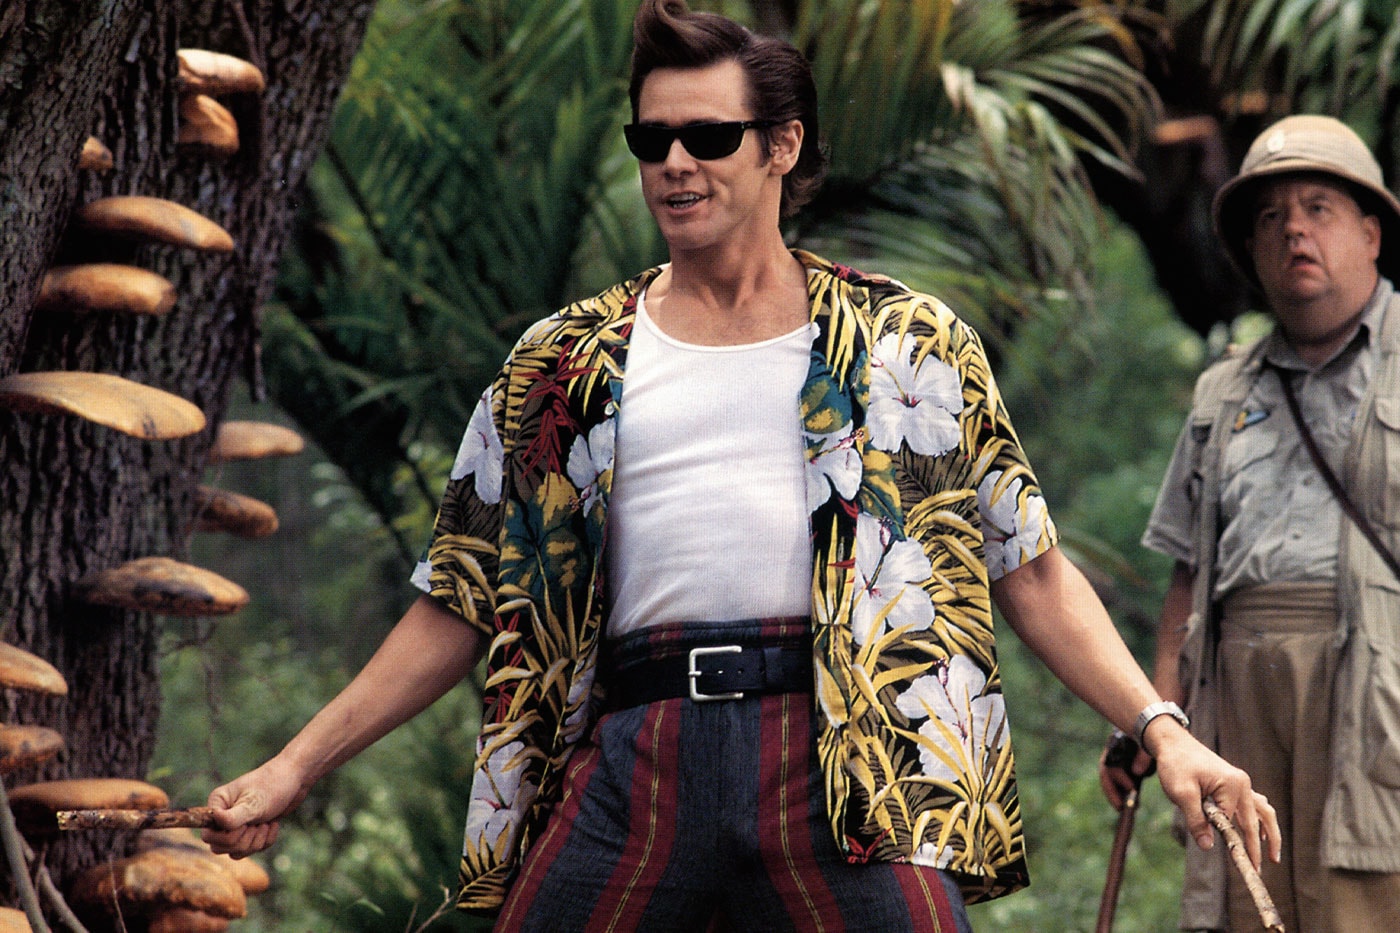 Jim Carrey Seriously Considers 'Ace Ventura 3' but Only if Directed by Christopher Nolan sonic the hedgehog 2 detective sequel Ace Ventura: Pet Detective (1994) and Ace Ventura: When Nature Calls (1995) 